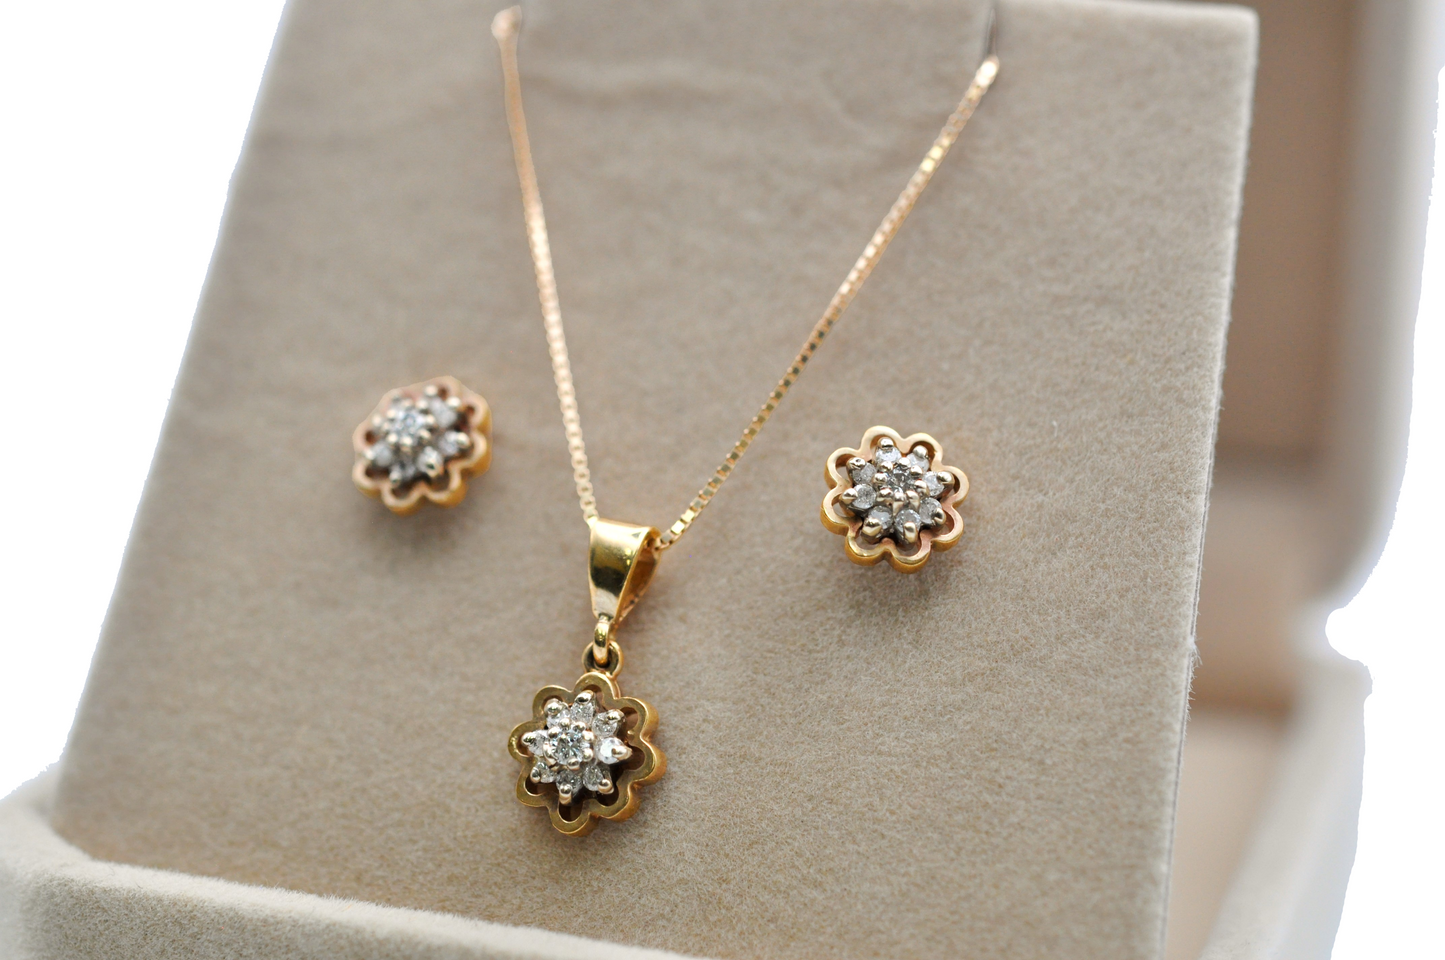 Yellow Gold Diamond Flower Earring and Necklace Set